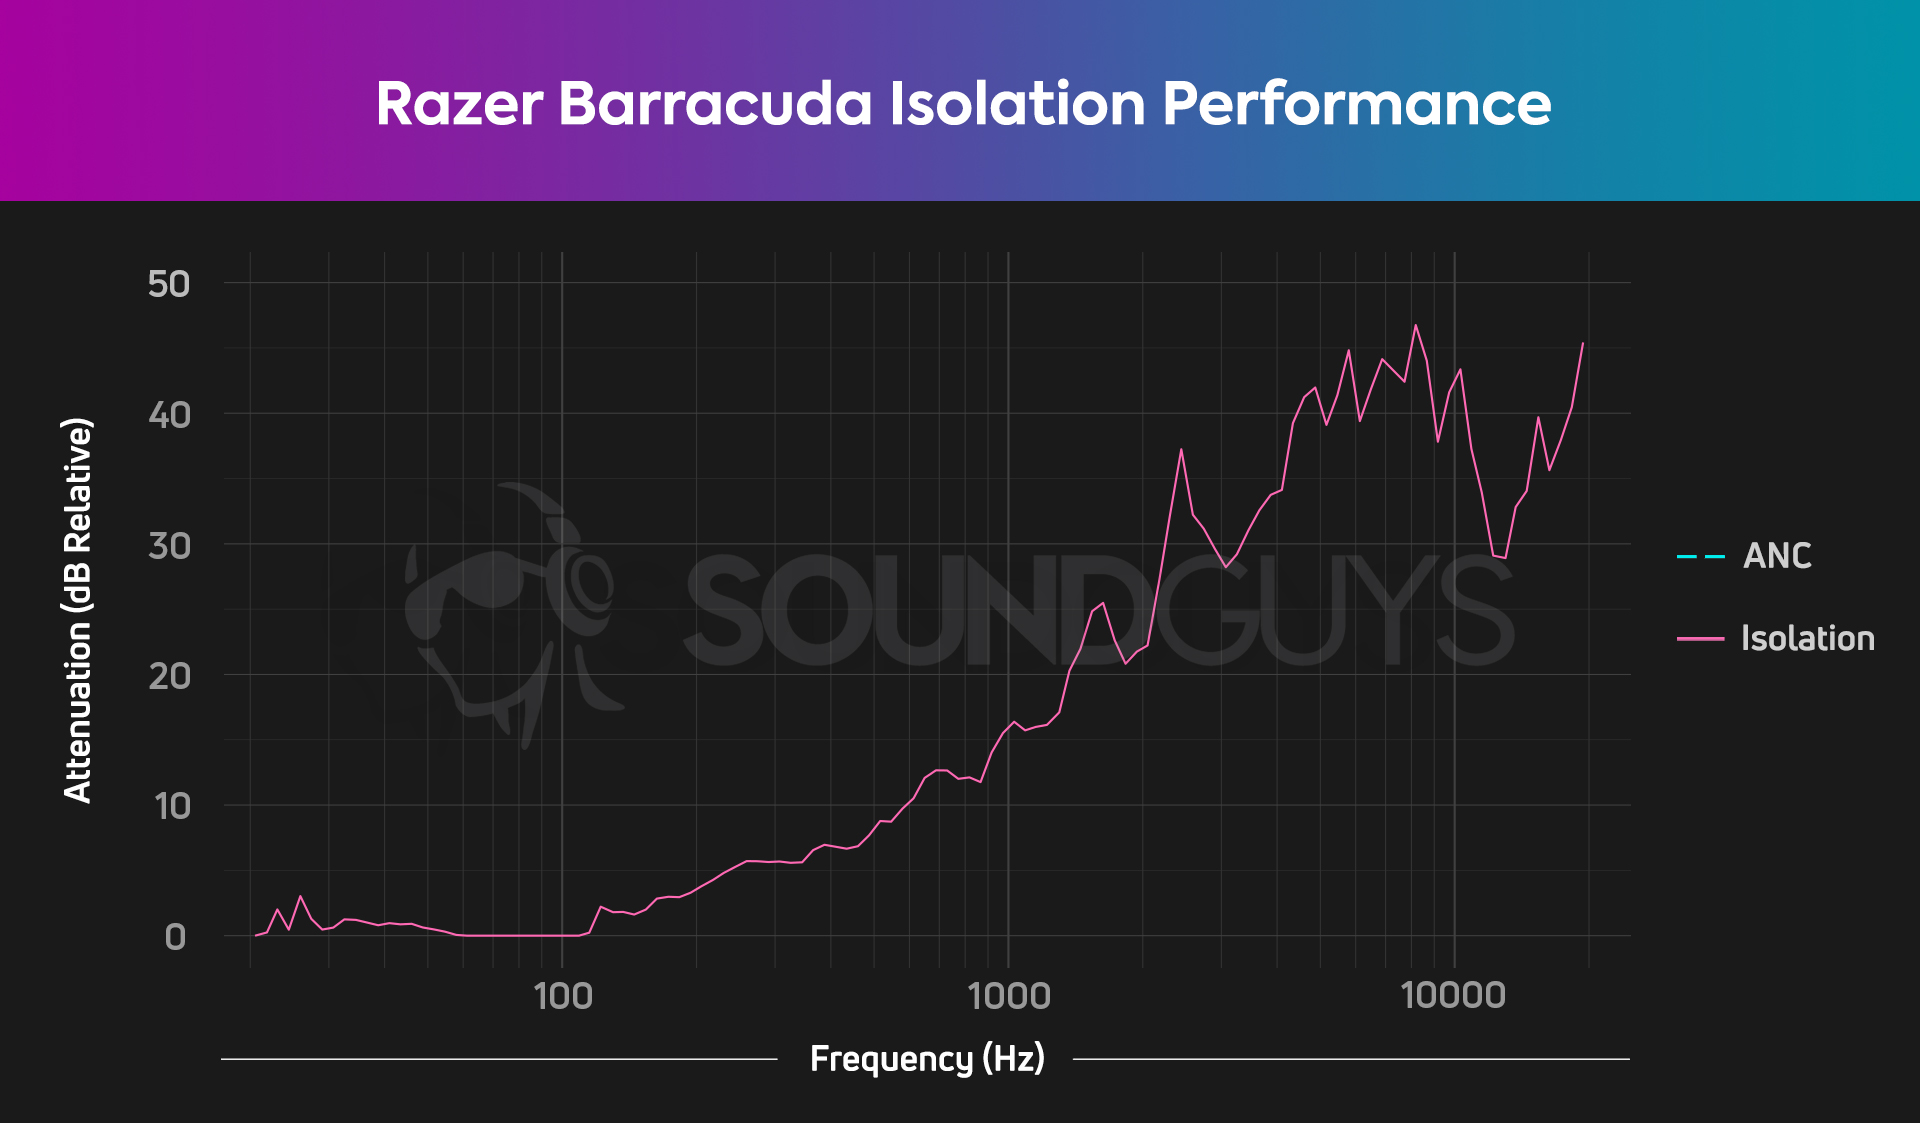 An isolation chart for the Razer Barracuda gaming headset, which shows good high-end attenuation for a